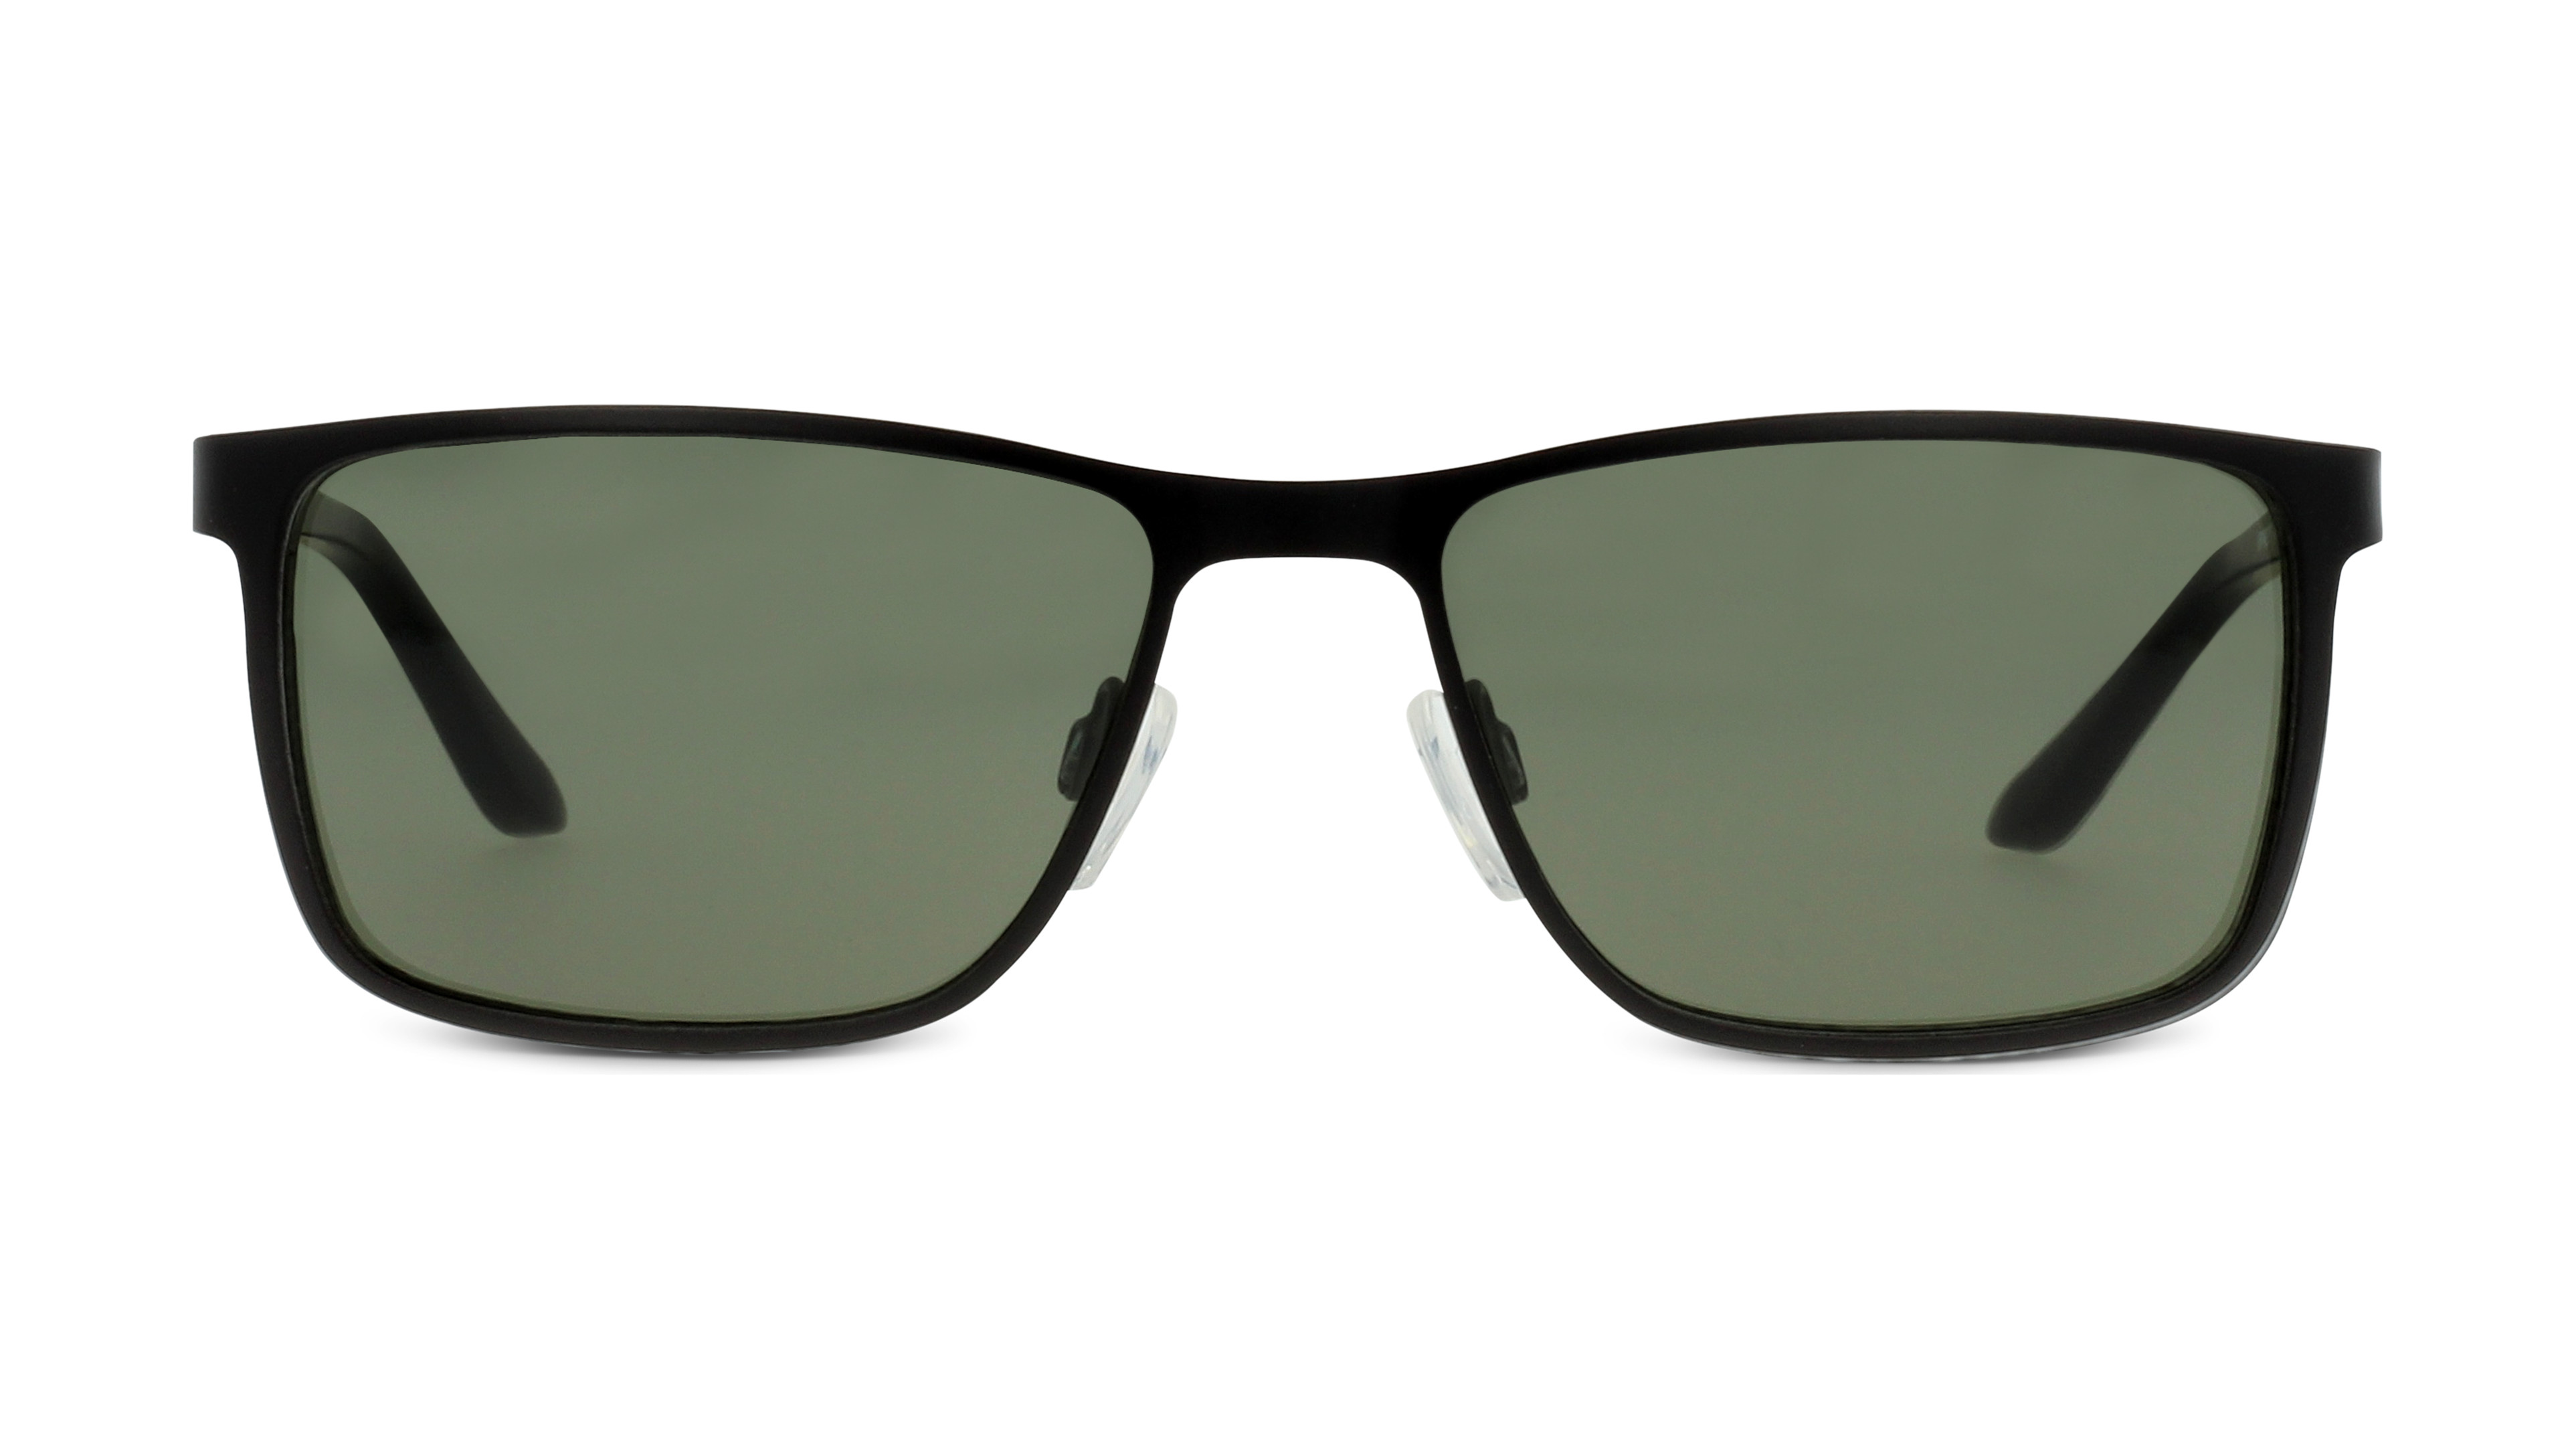 [products.image.front] HUMPHREY´S eyewear 585230 101040 Sonnenbrille